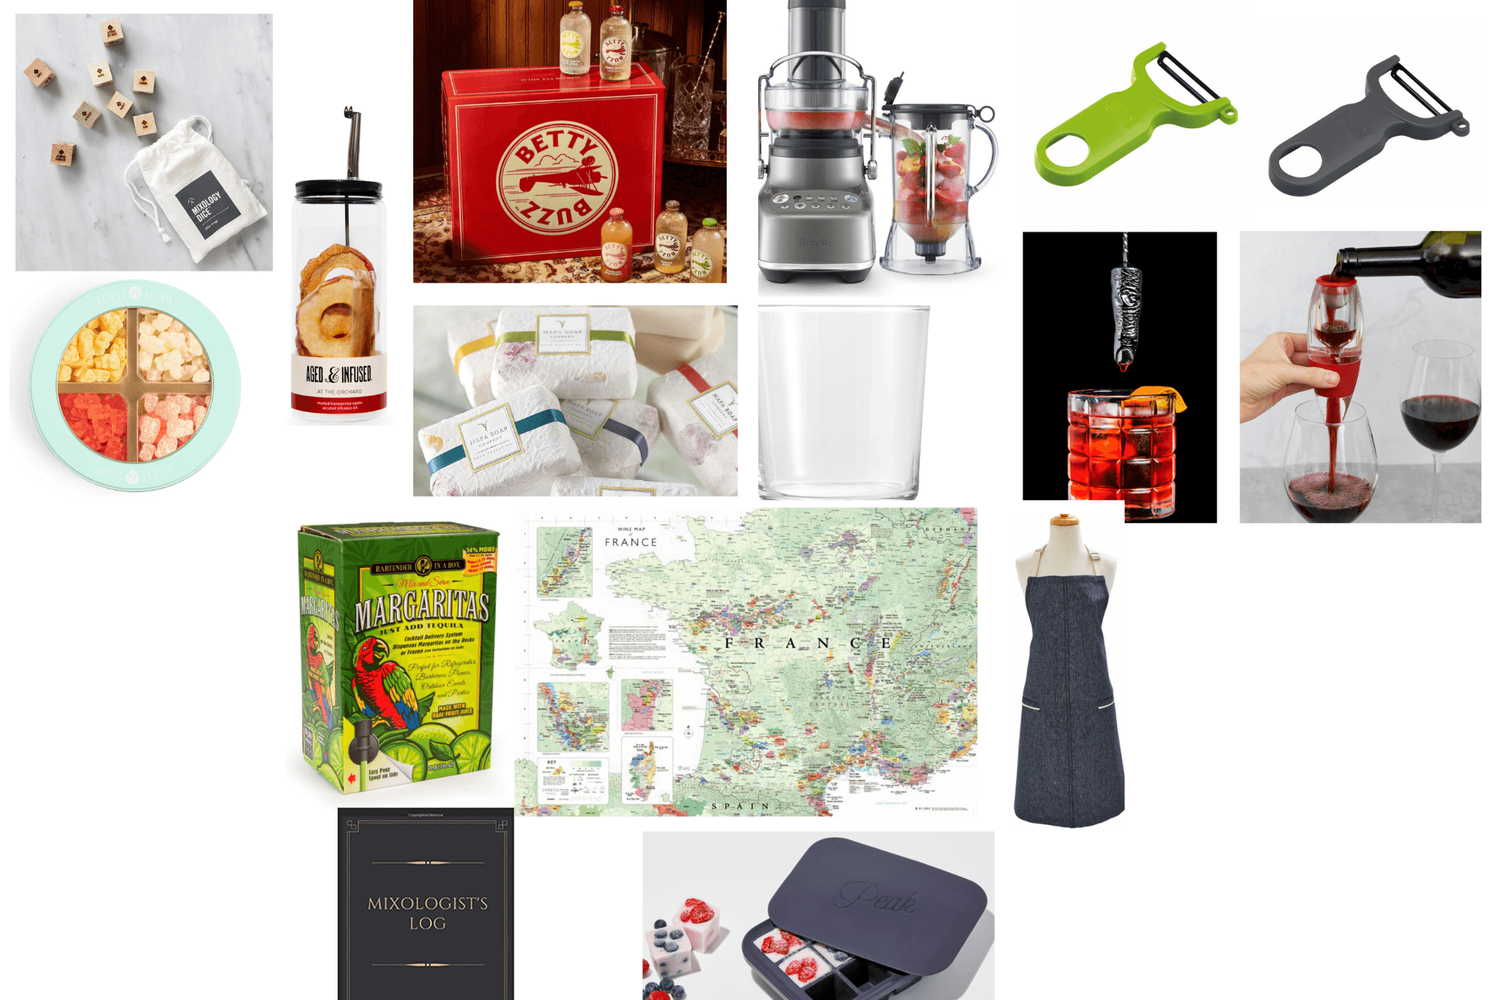 CWE Holiday Gift Guide: Gifts For Him